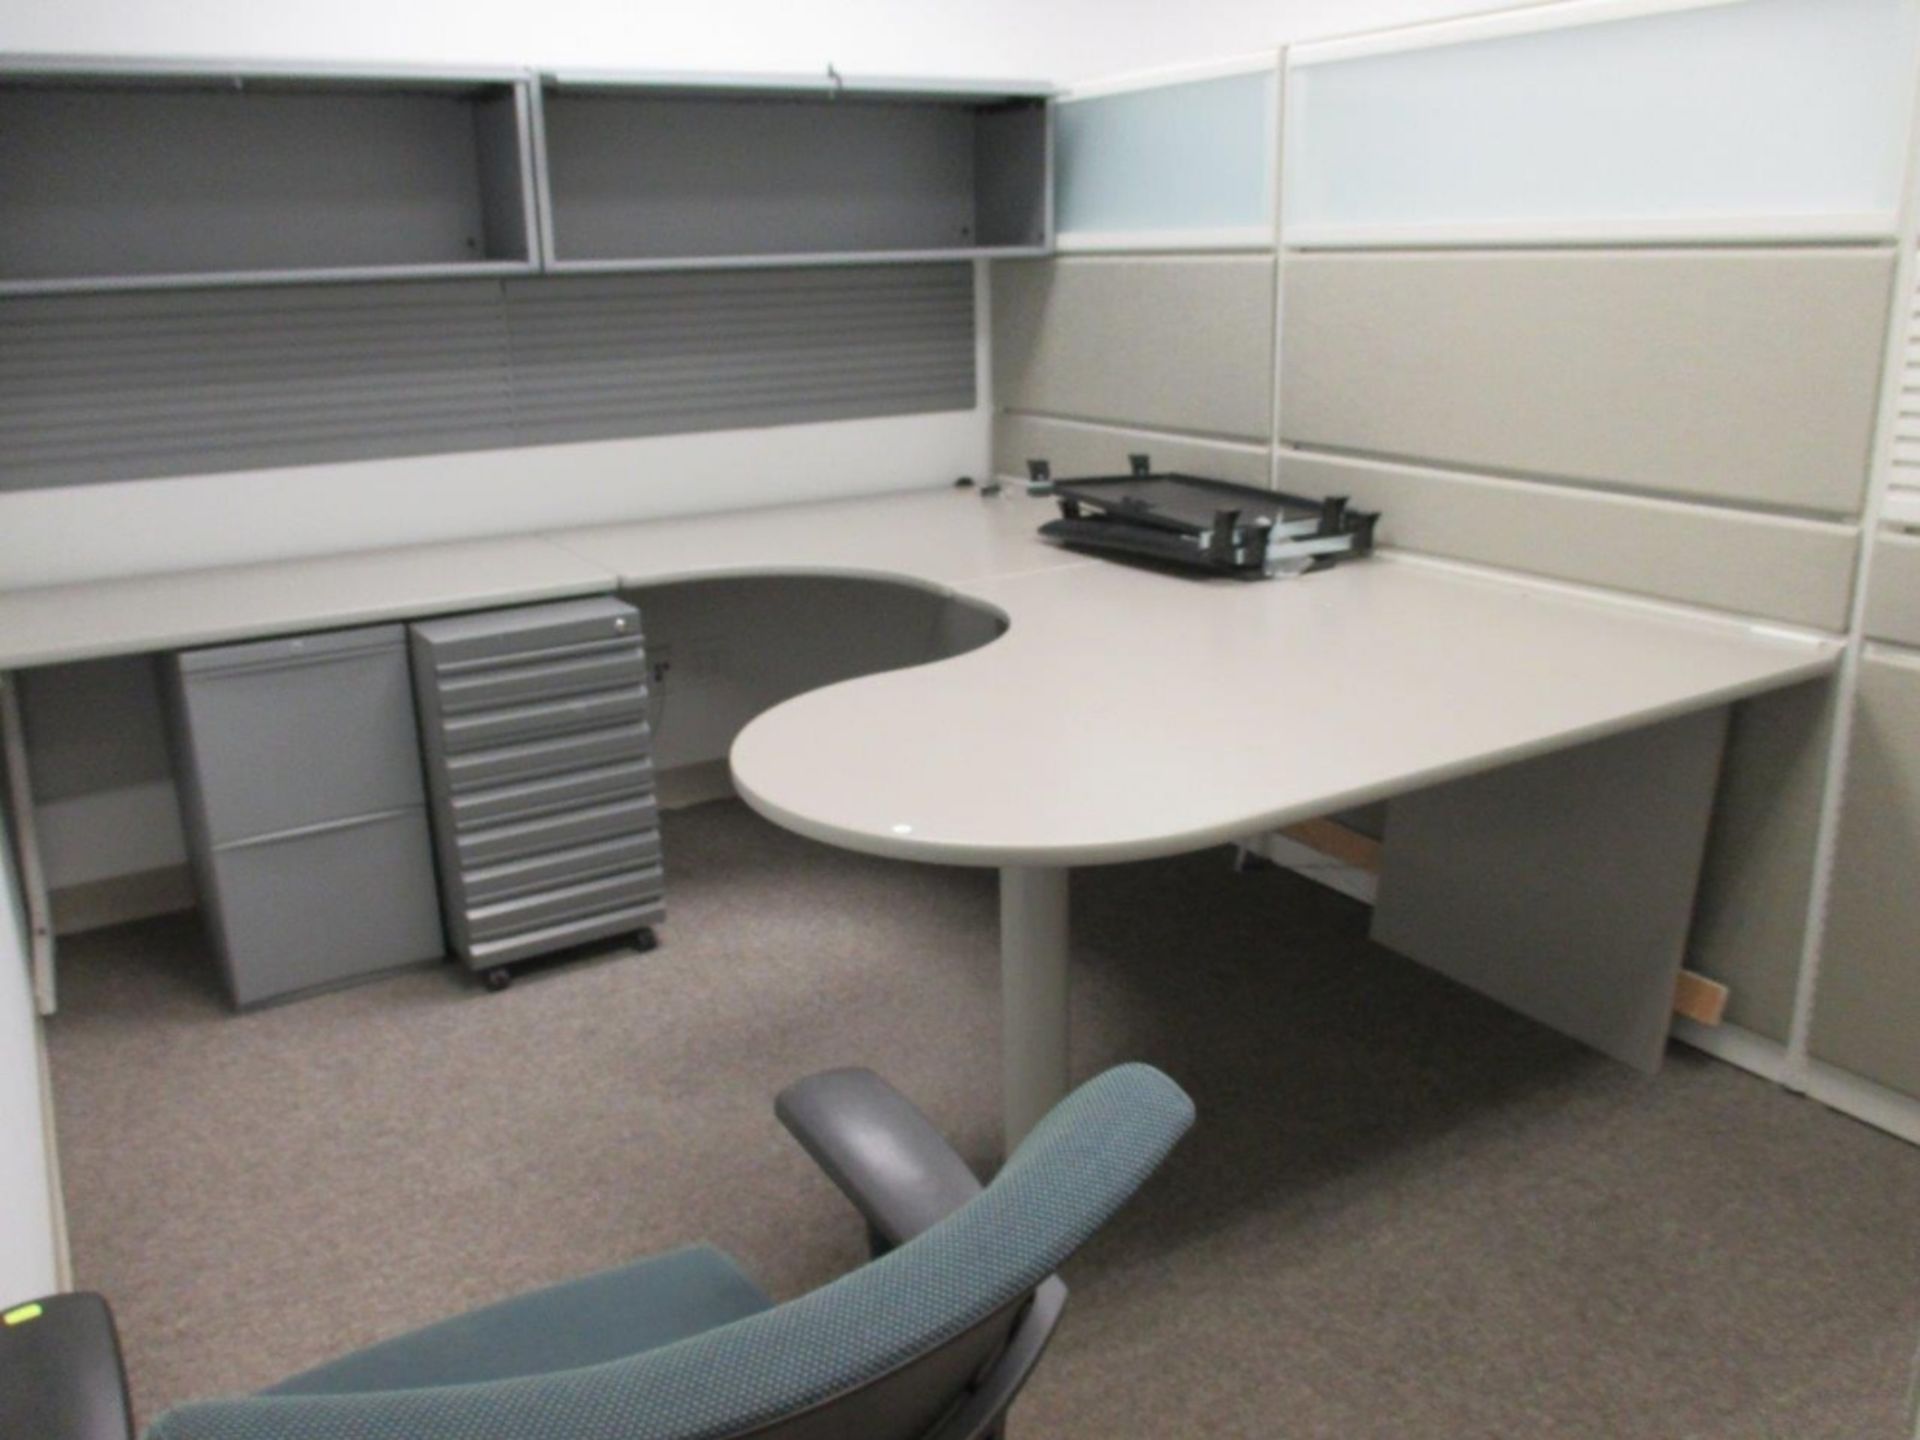 2008 Tecknion 3 Station Cubicle System - Image 4 of 4